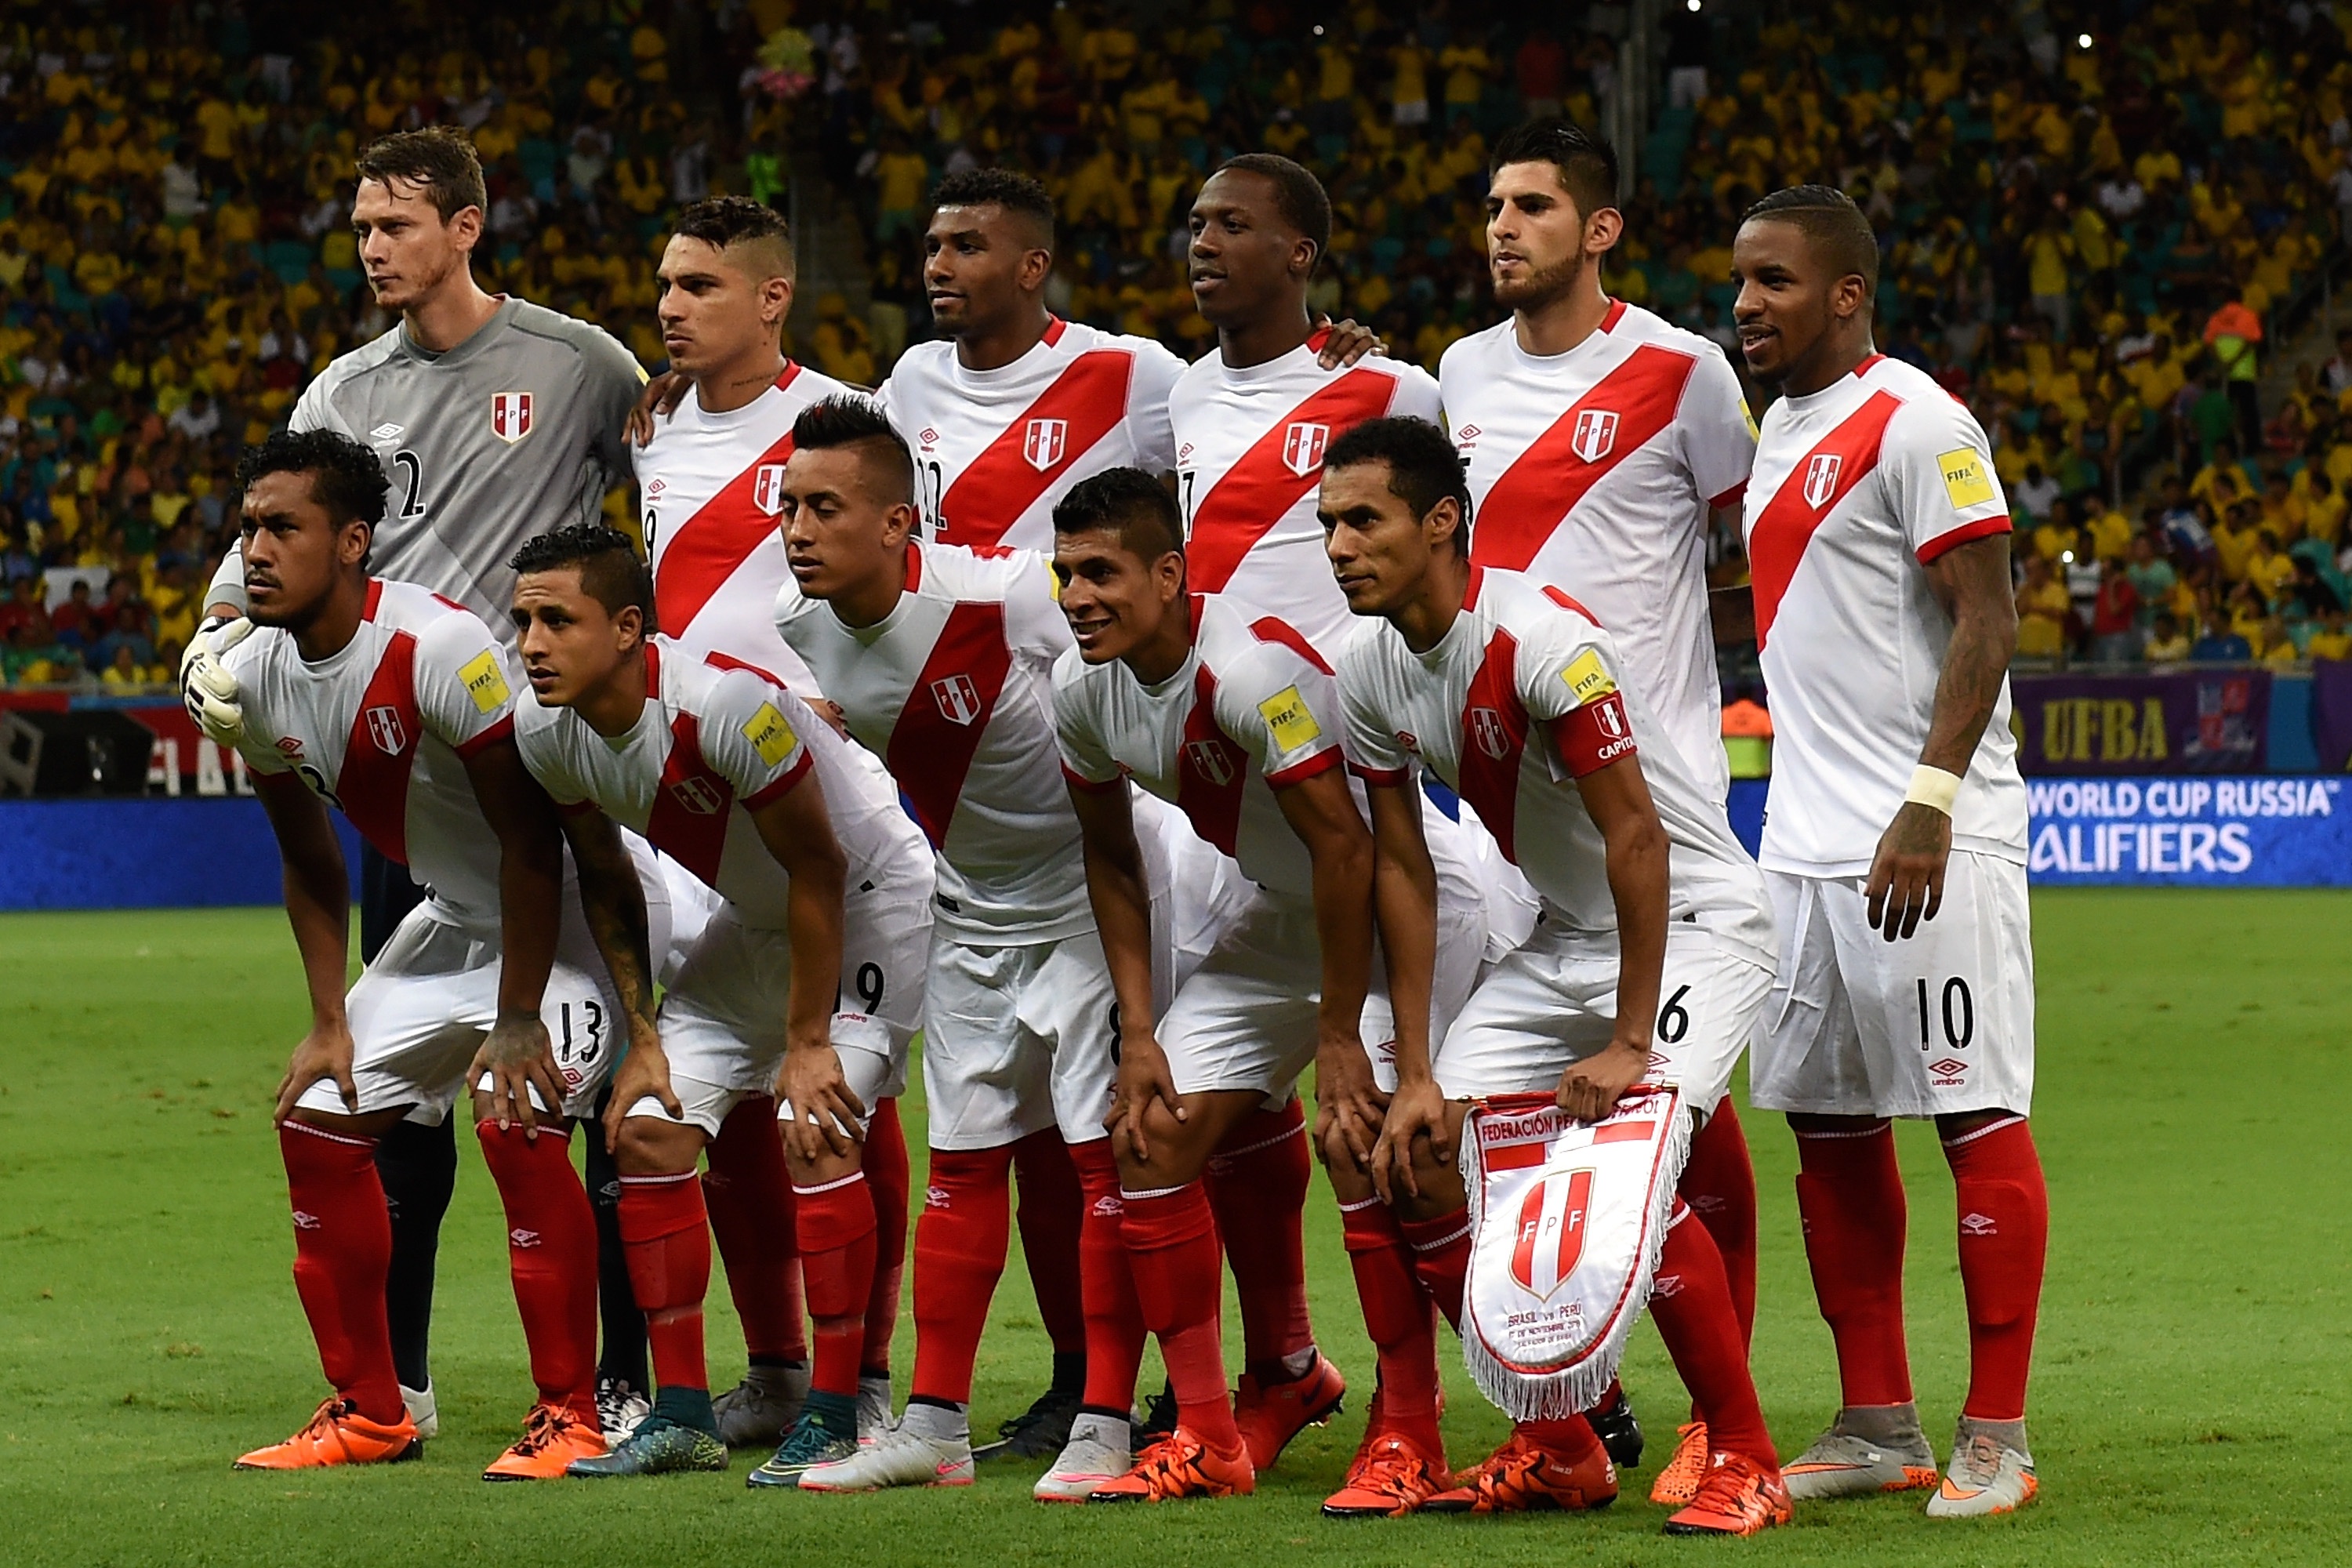 Peru Is On the Verge Of Making the World Cup for the First Time in 36 Years